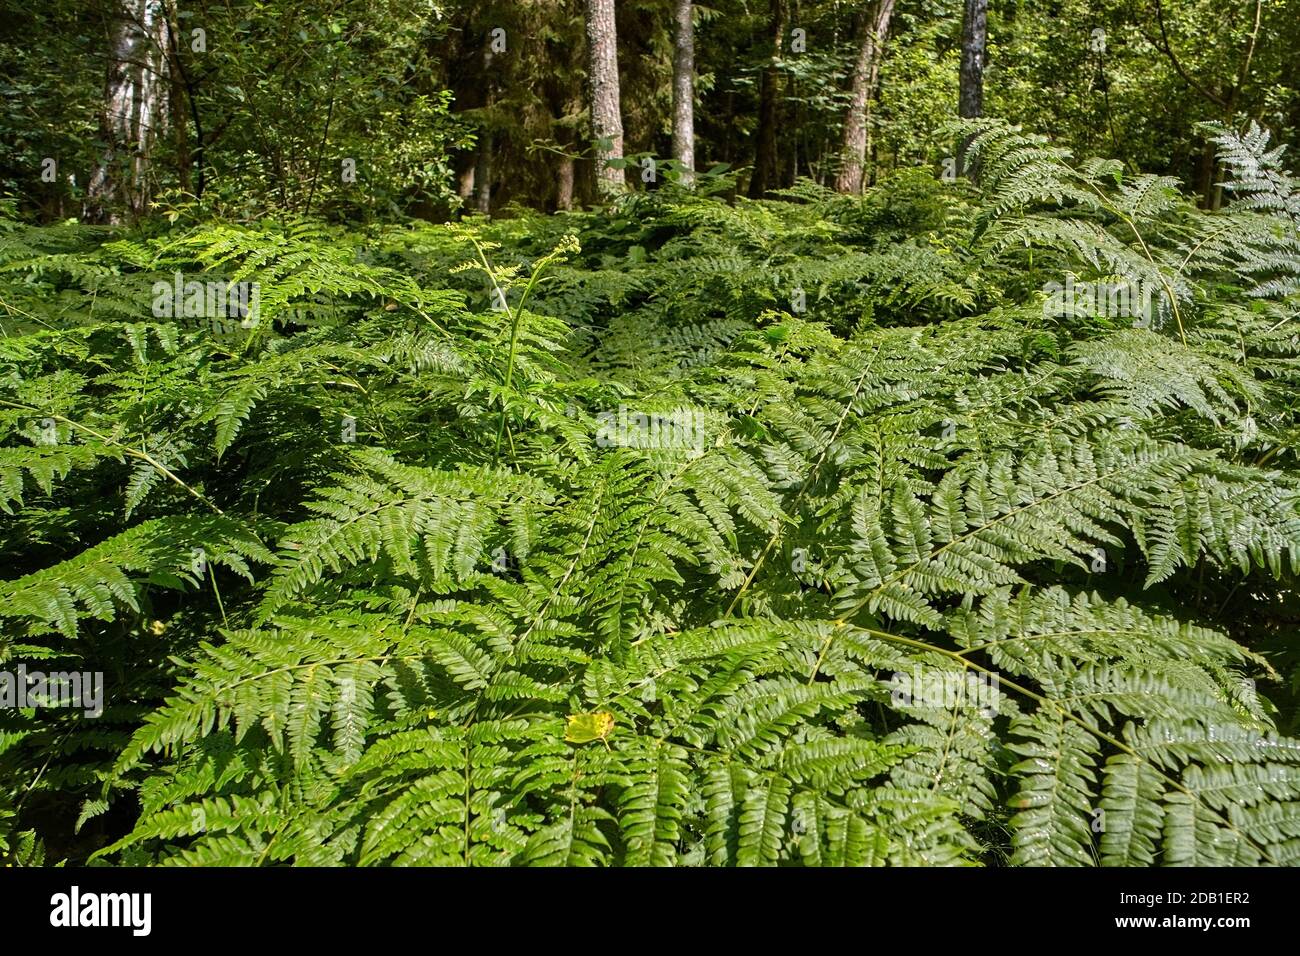 Fern growing in a dense forest. Stock Photo